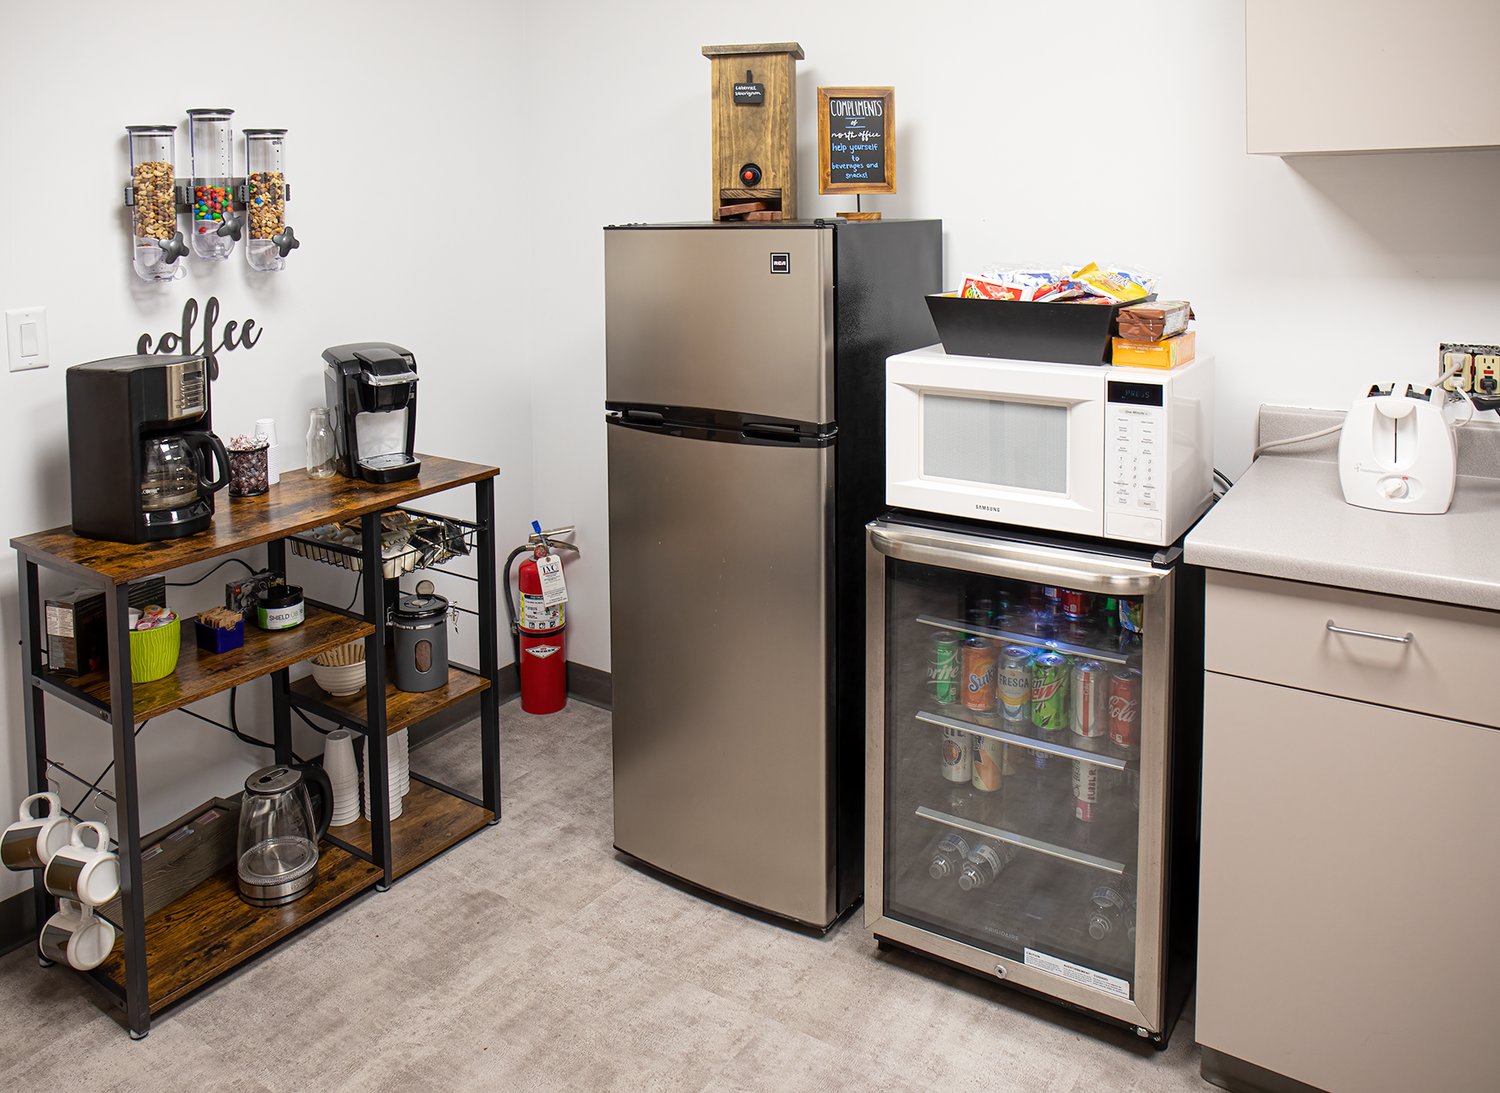 The kitchenette at North Office includes complementary soft drinks, coffee and tea for customers.